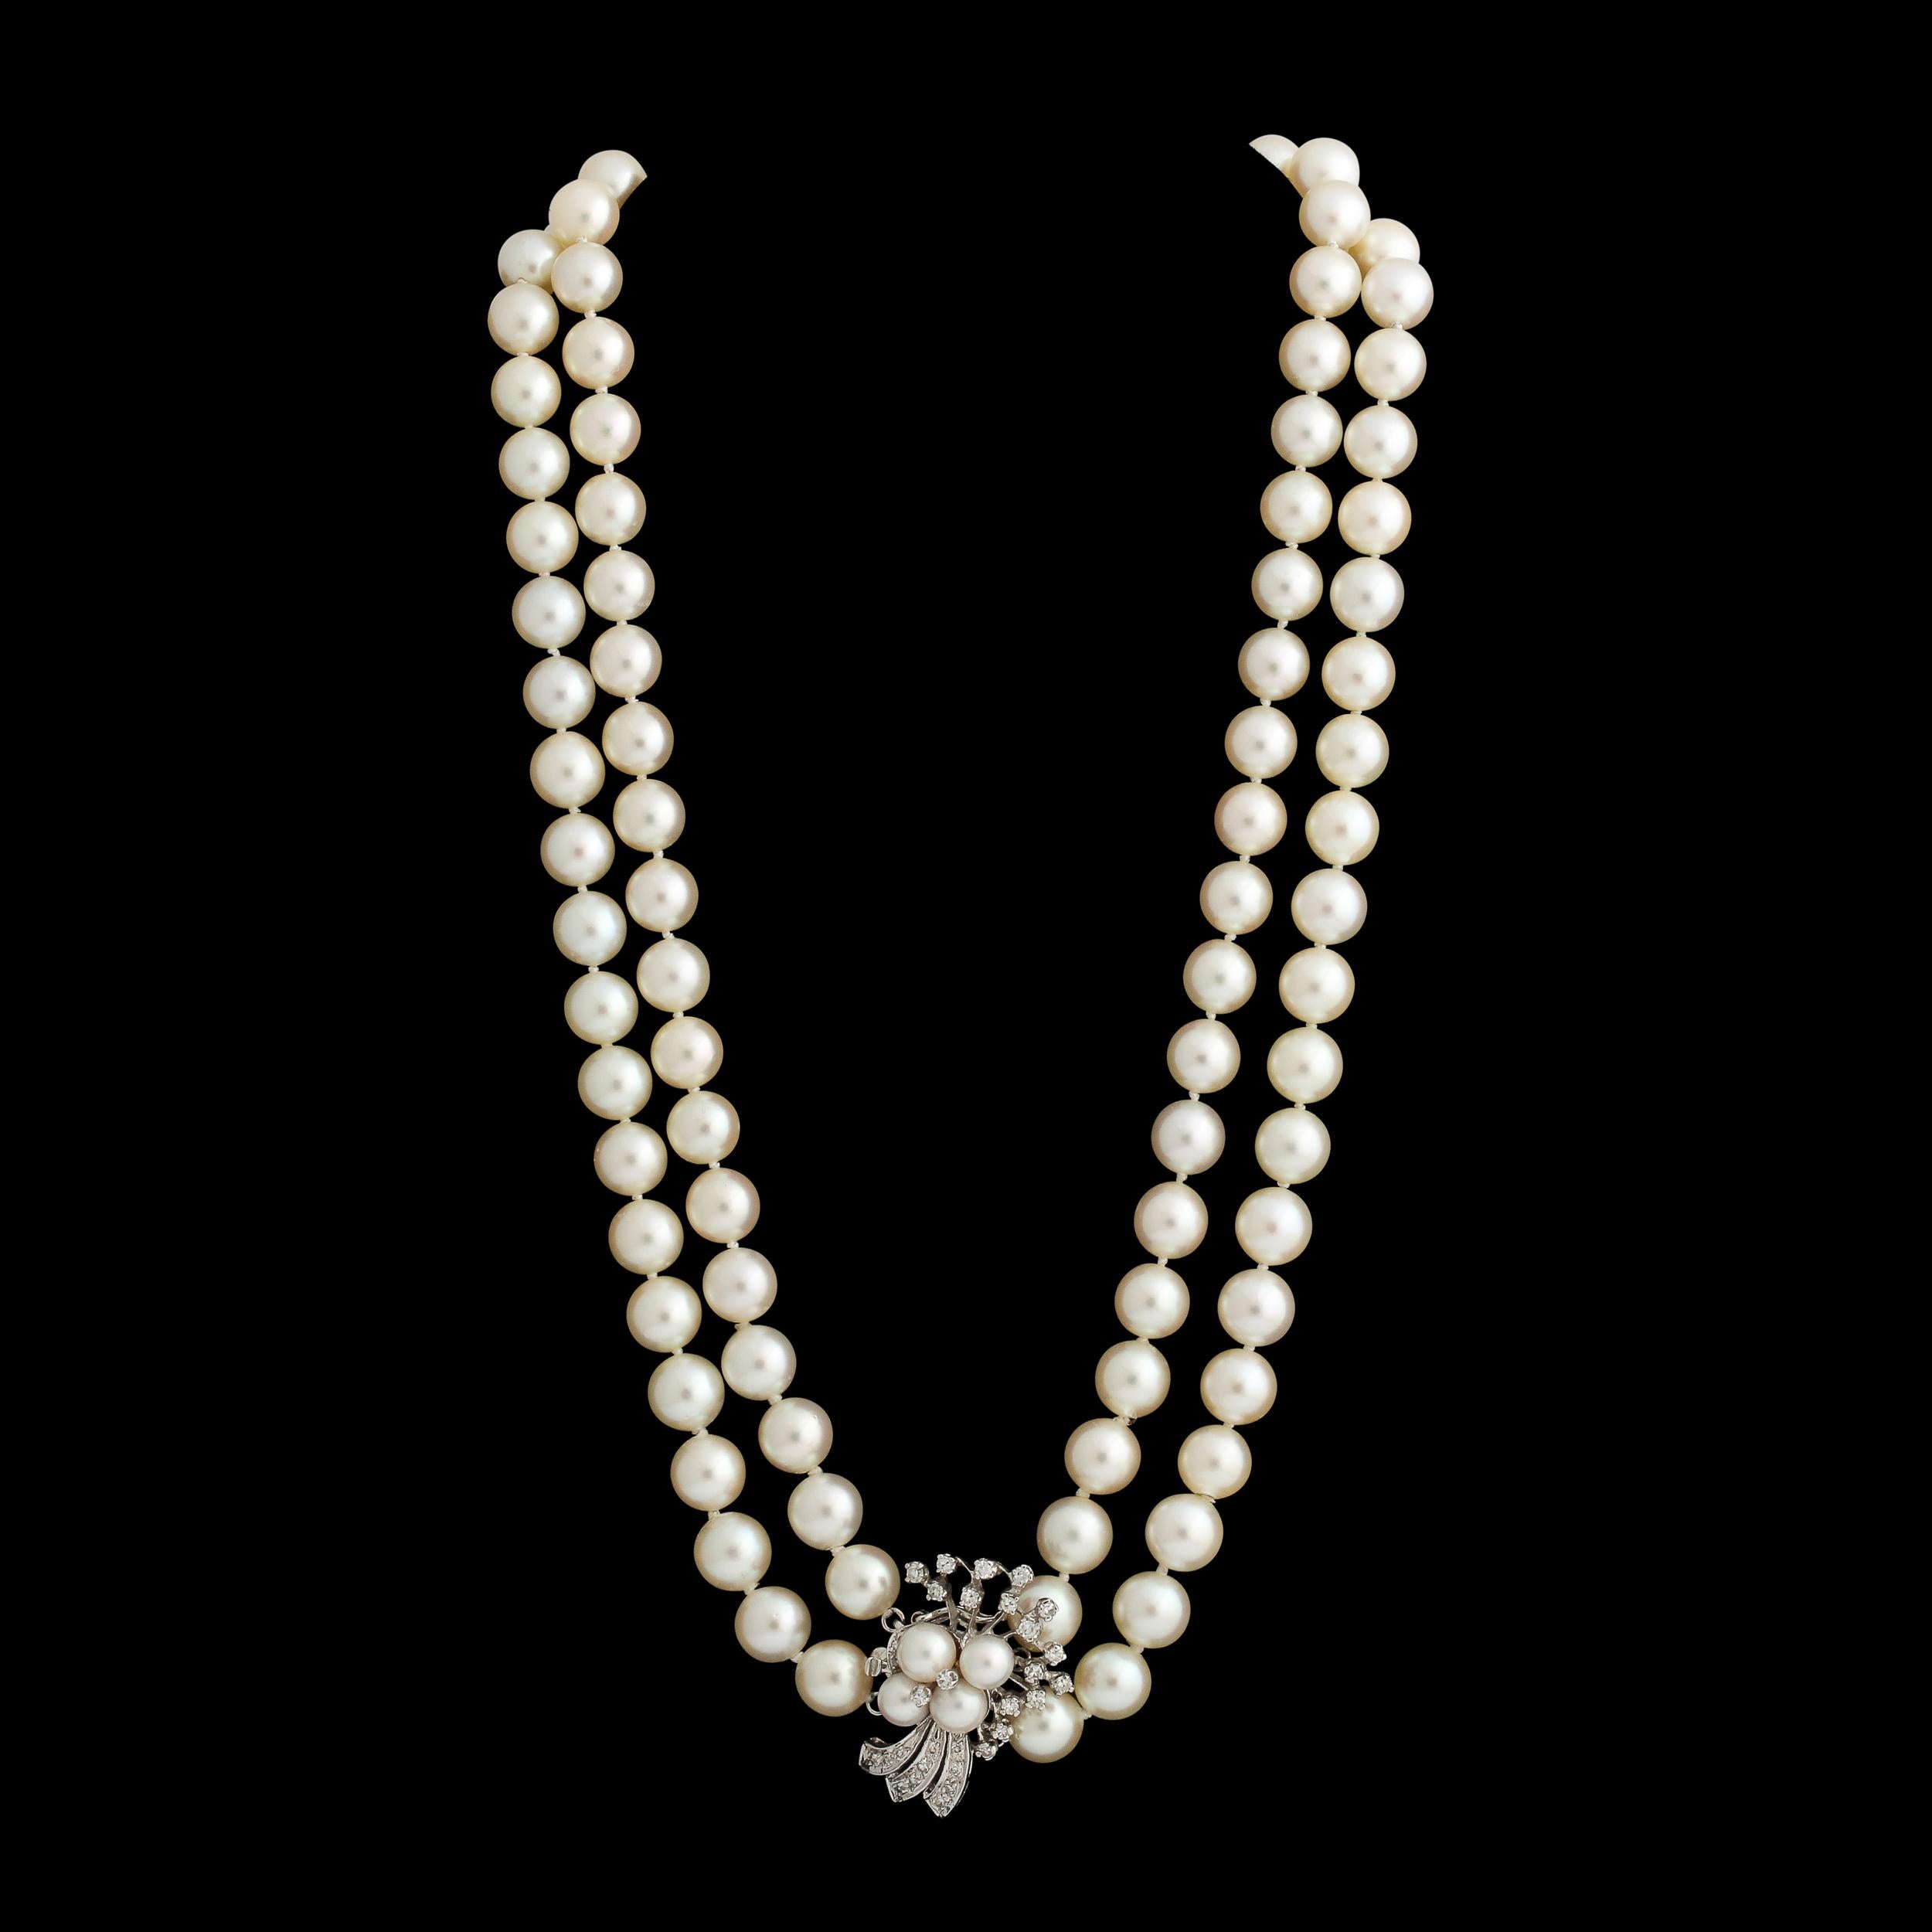 This double strand Pearl necklace is set with is set with a diamond and cultured pearl clasp in 14k white gold set  with single cut diamonds .The cultured pearls are approximately 8 mm each and have a lovely cream body color and good luster with